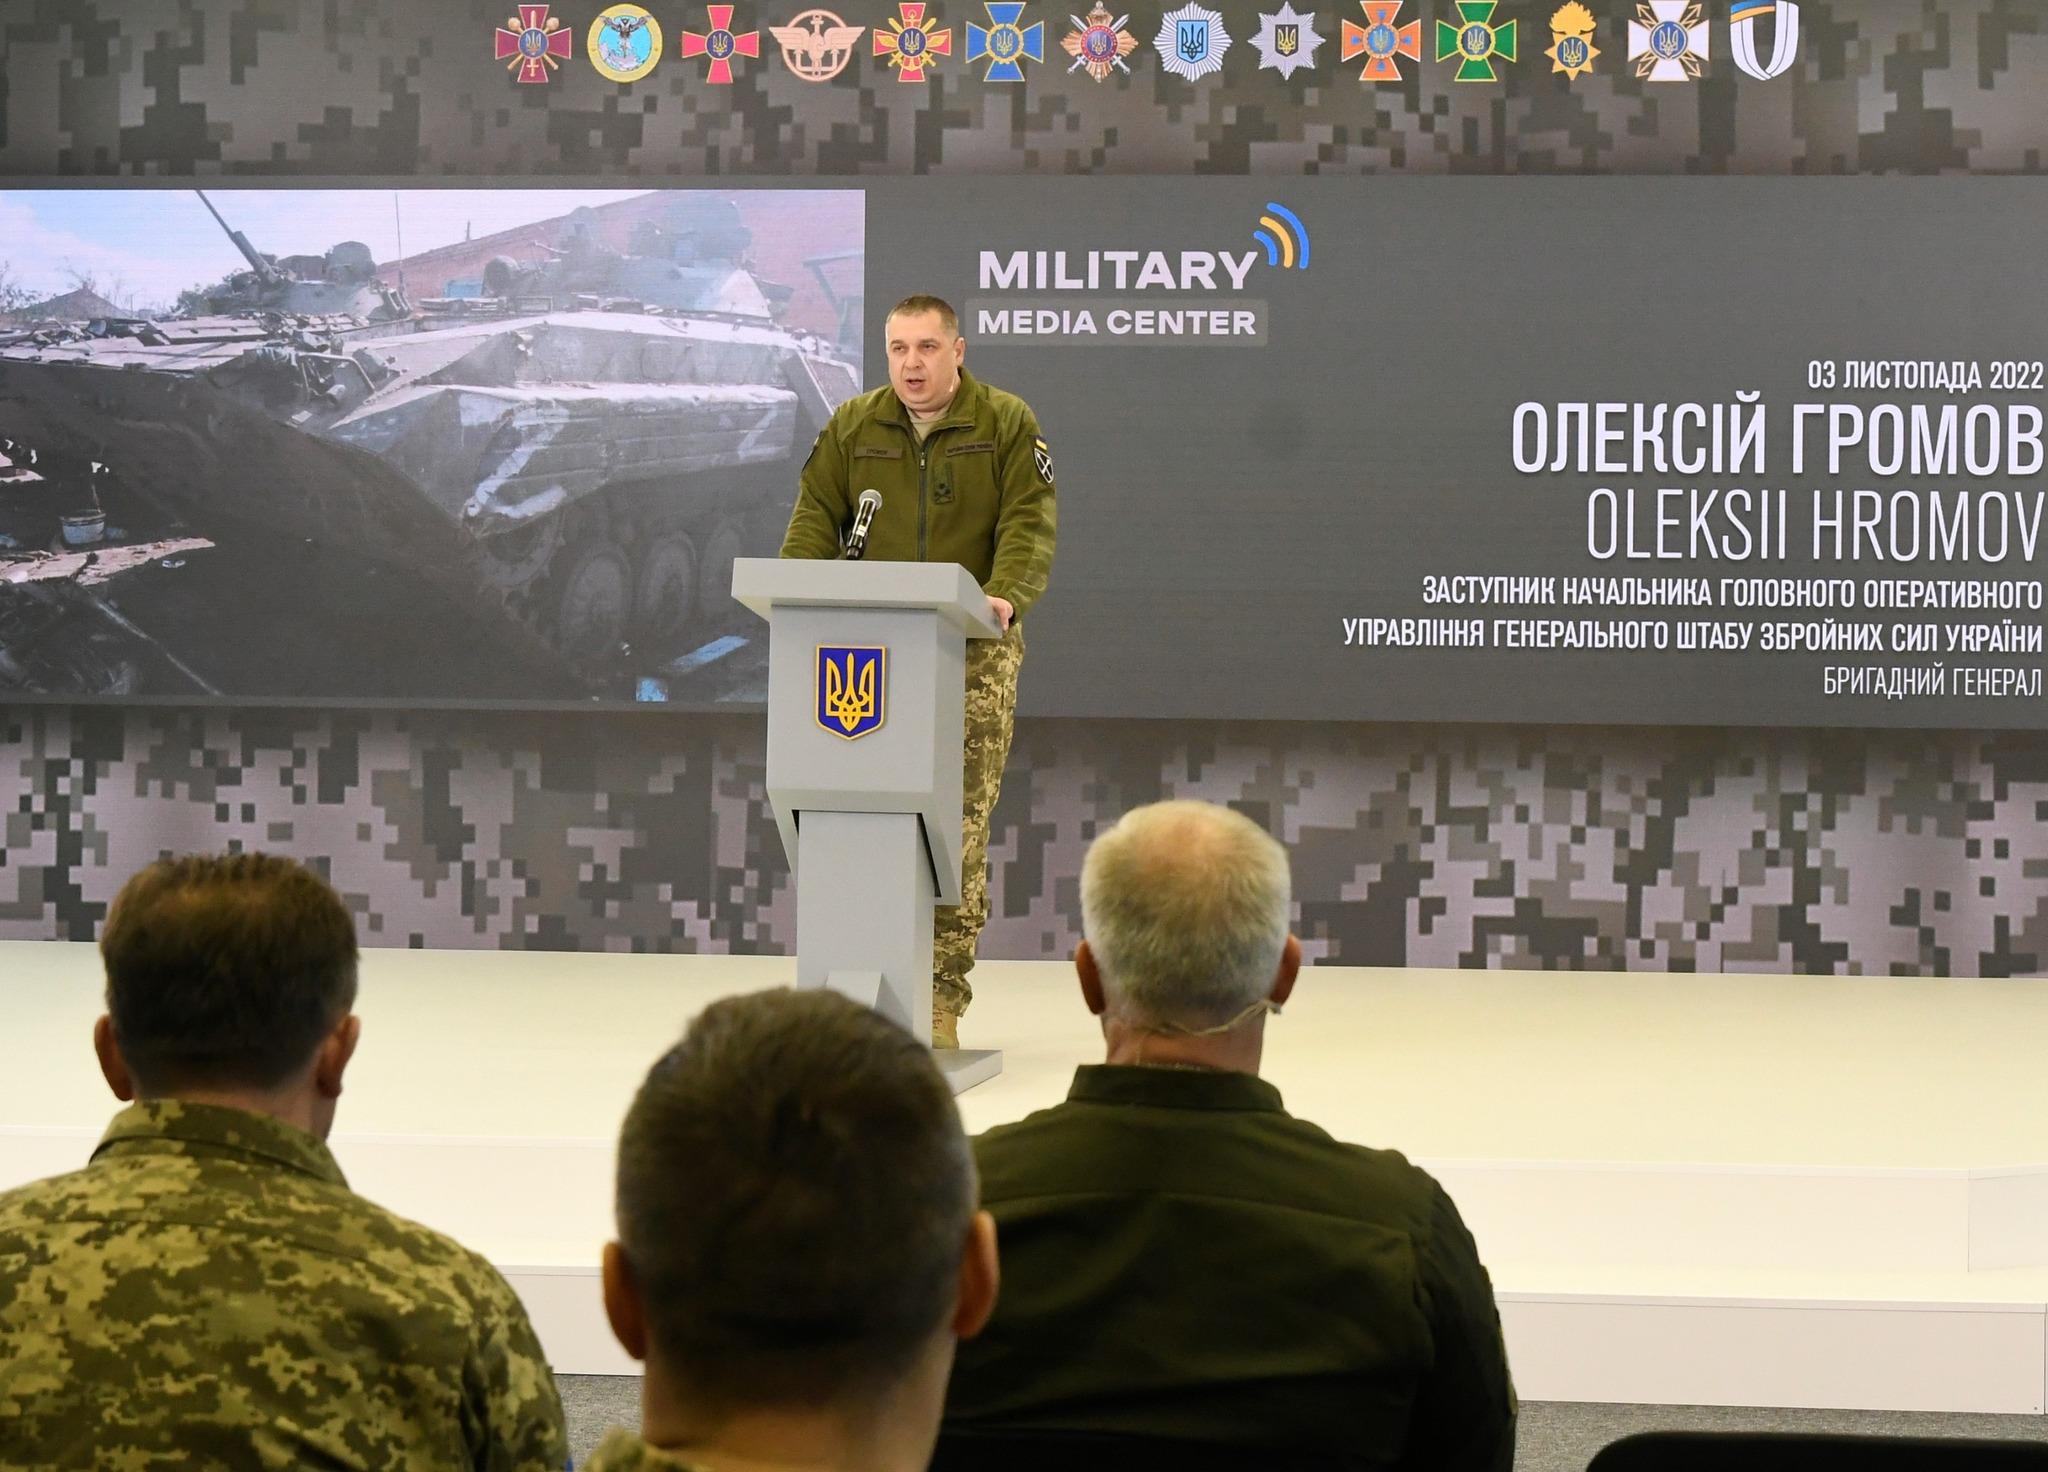 The General Staff predicted a possible new offensive from Belarus